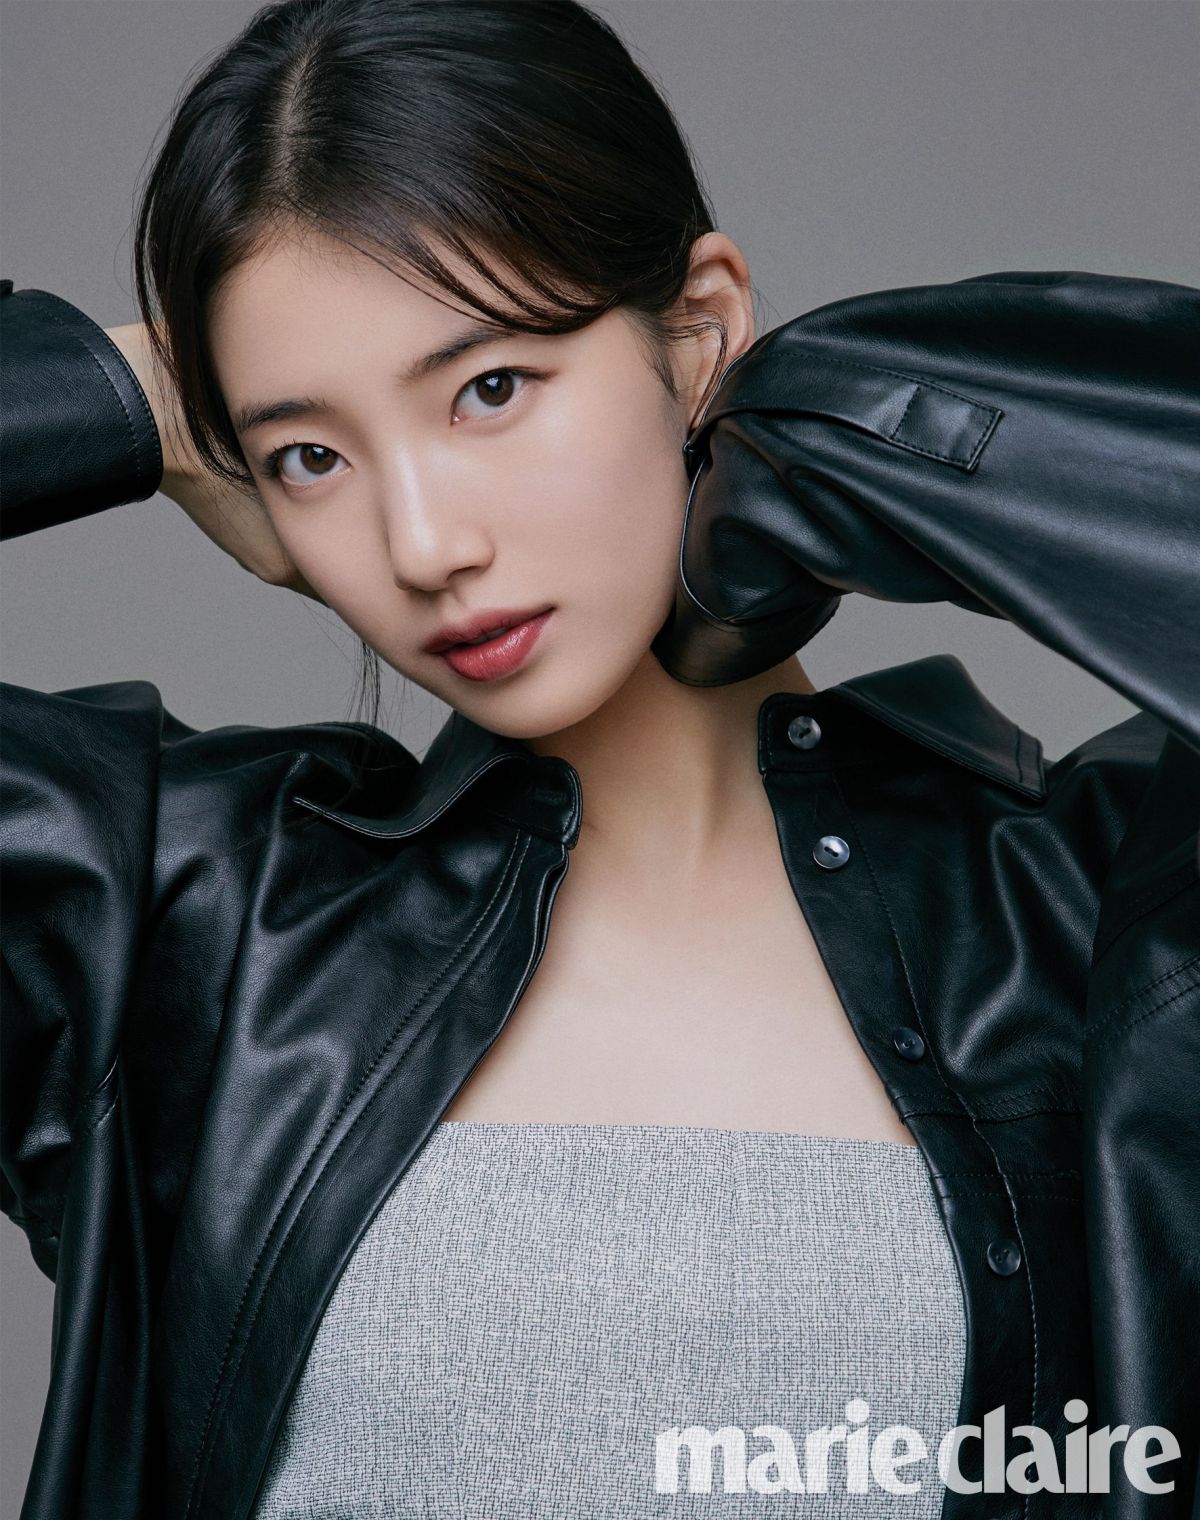 BAE SUZY in Marie Claire Magazine, March 2020 – HawtCelebs